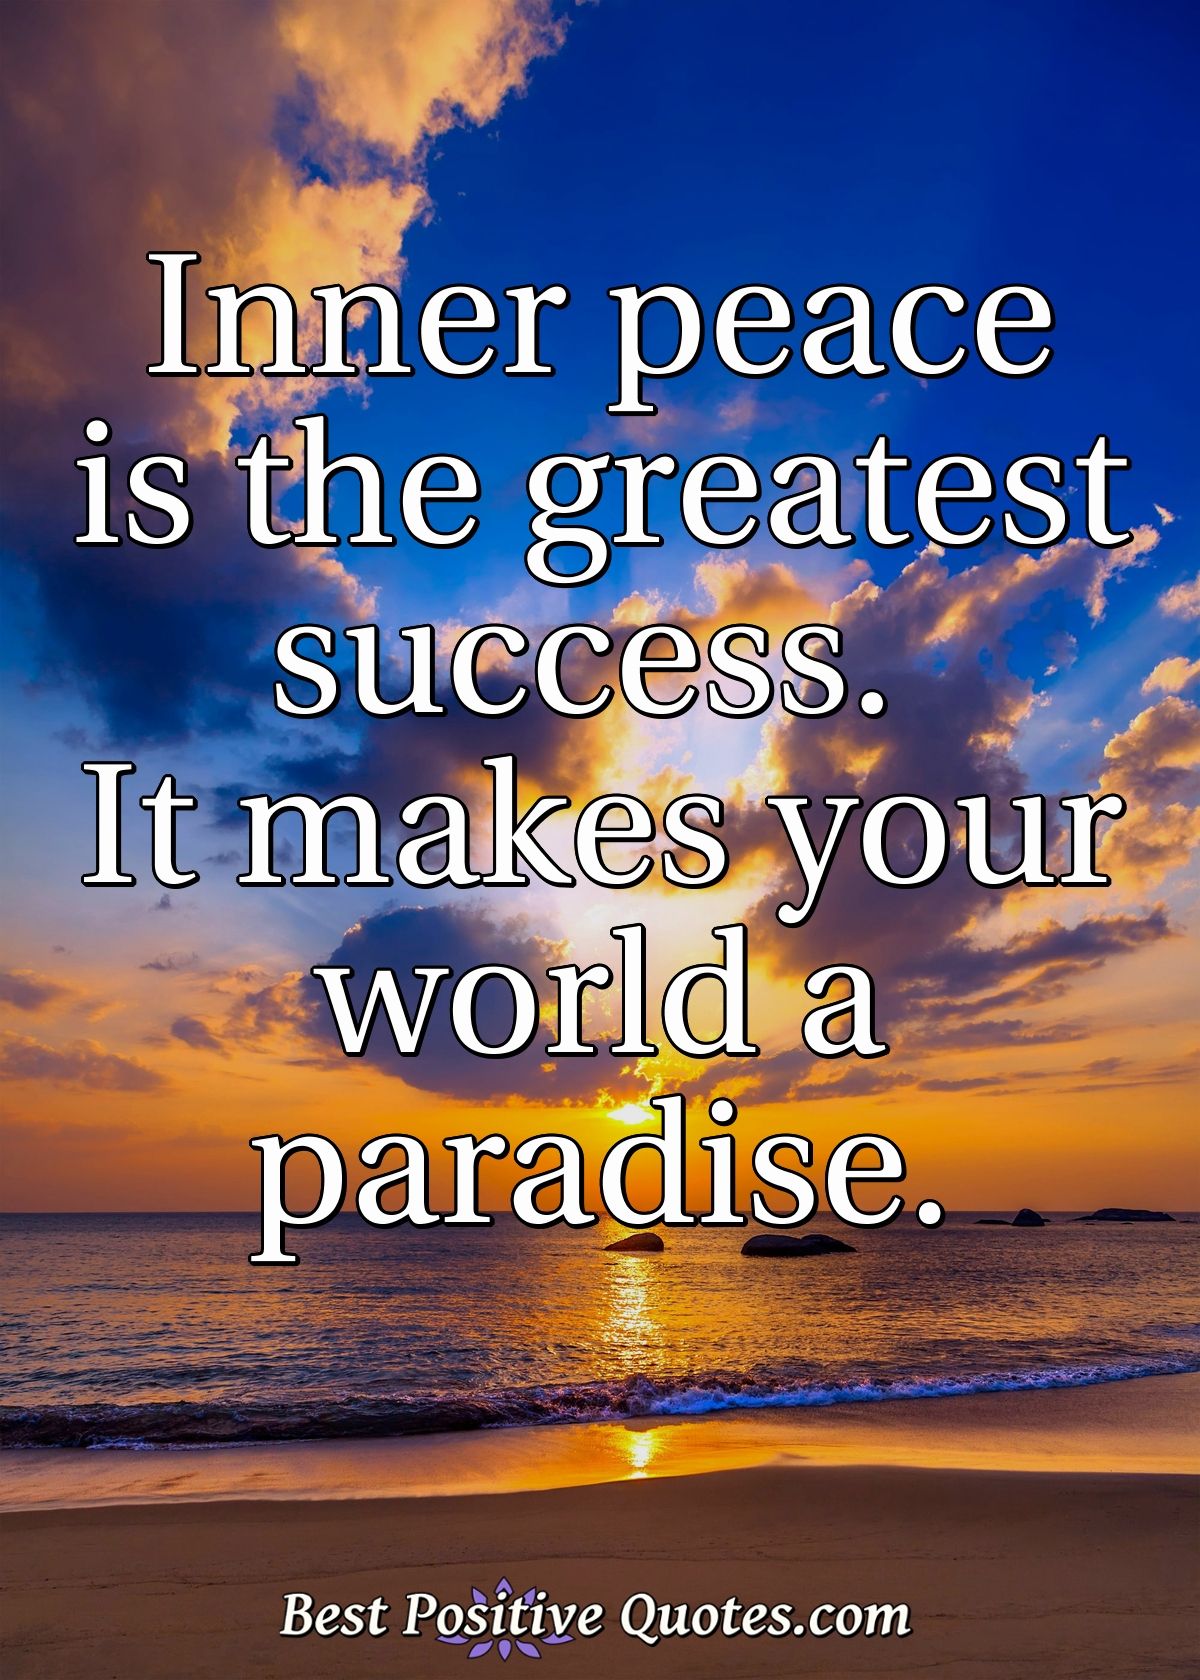 Inner peace is the greatest success. It makes your world a paradise. - Anonymous